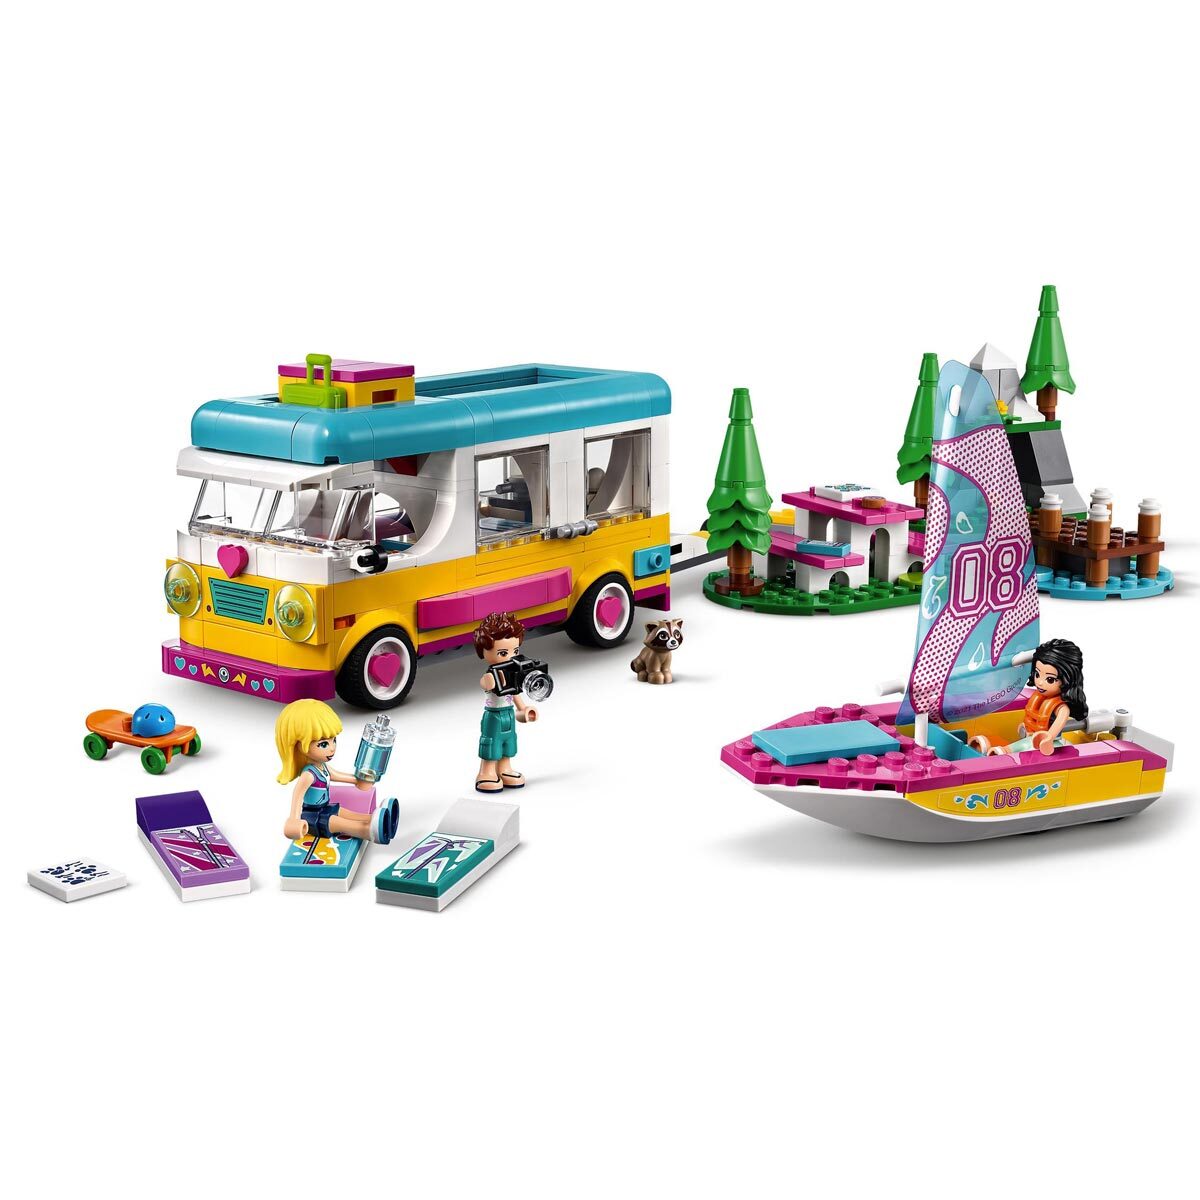 LEGO Friends Forest Camper Van and Sailboat Model 41681 (7+ Years